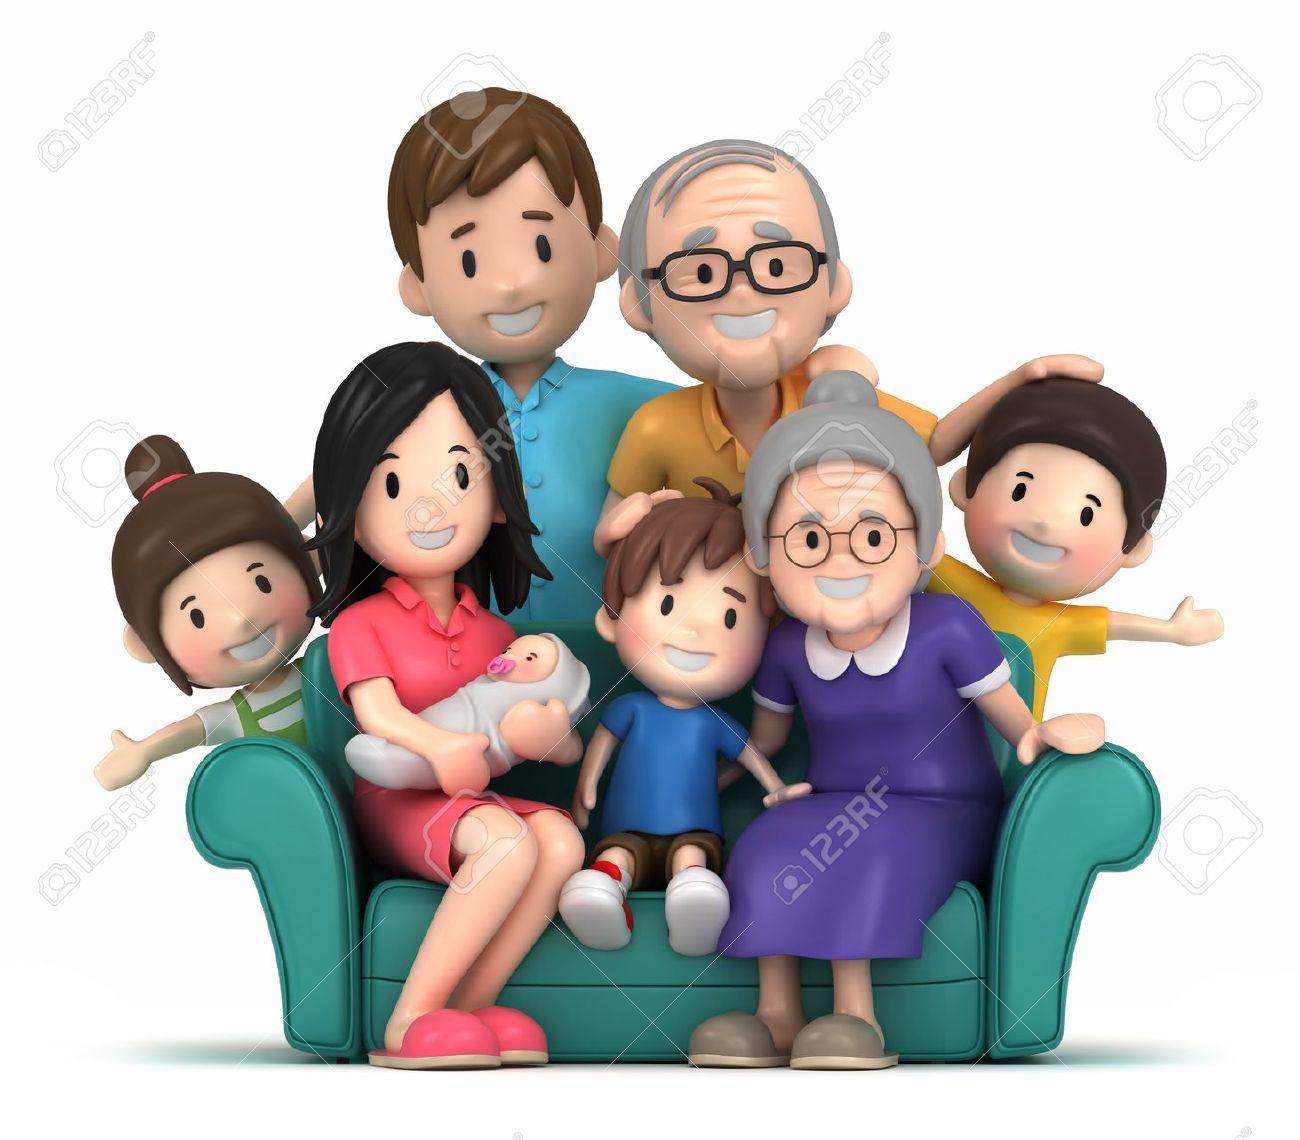 free clipart of a happy family - photo #1